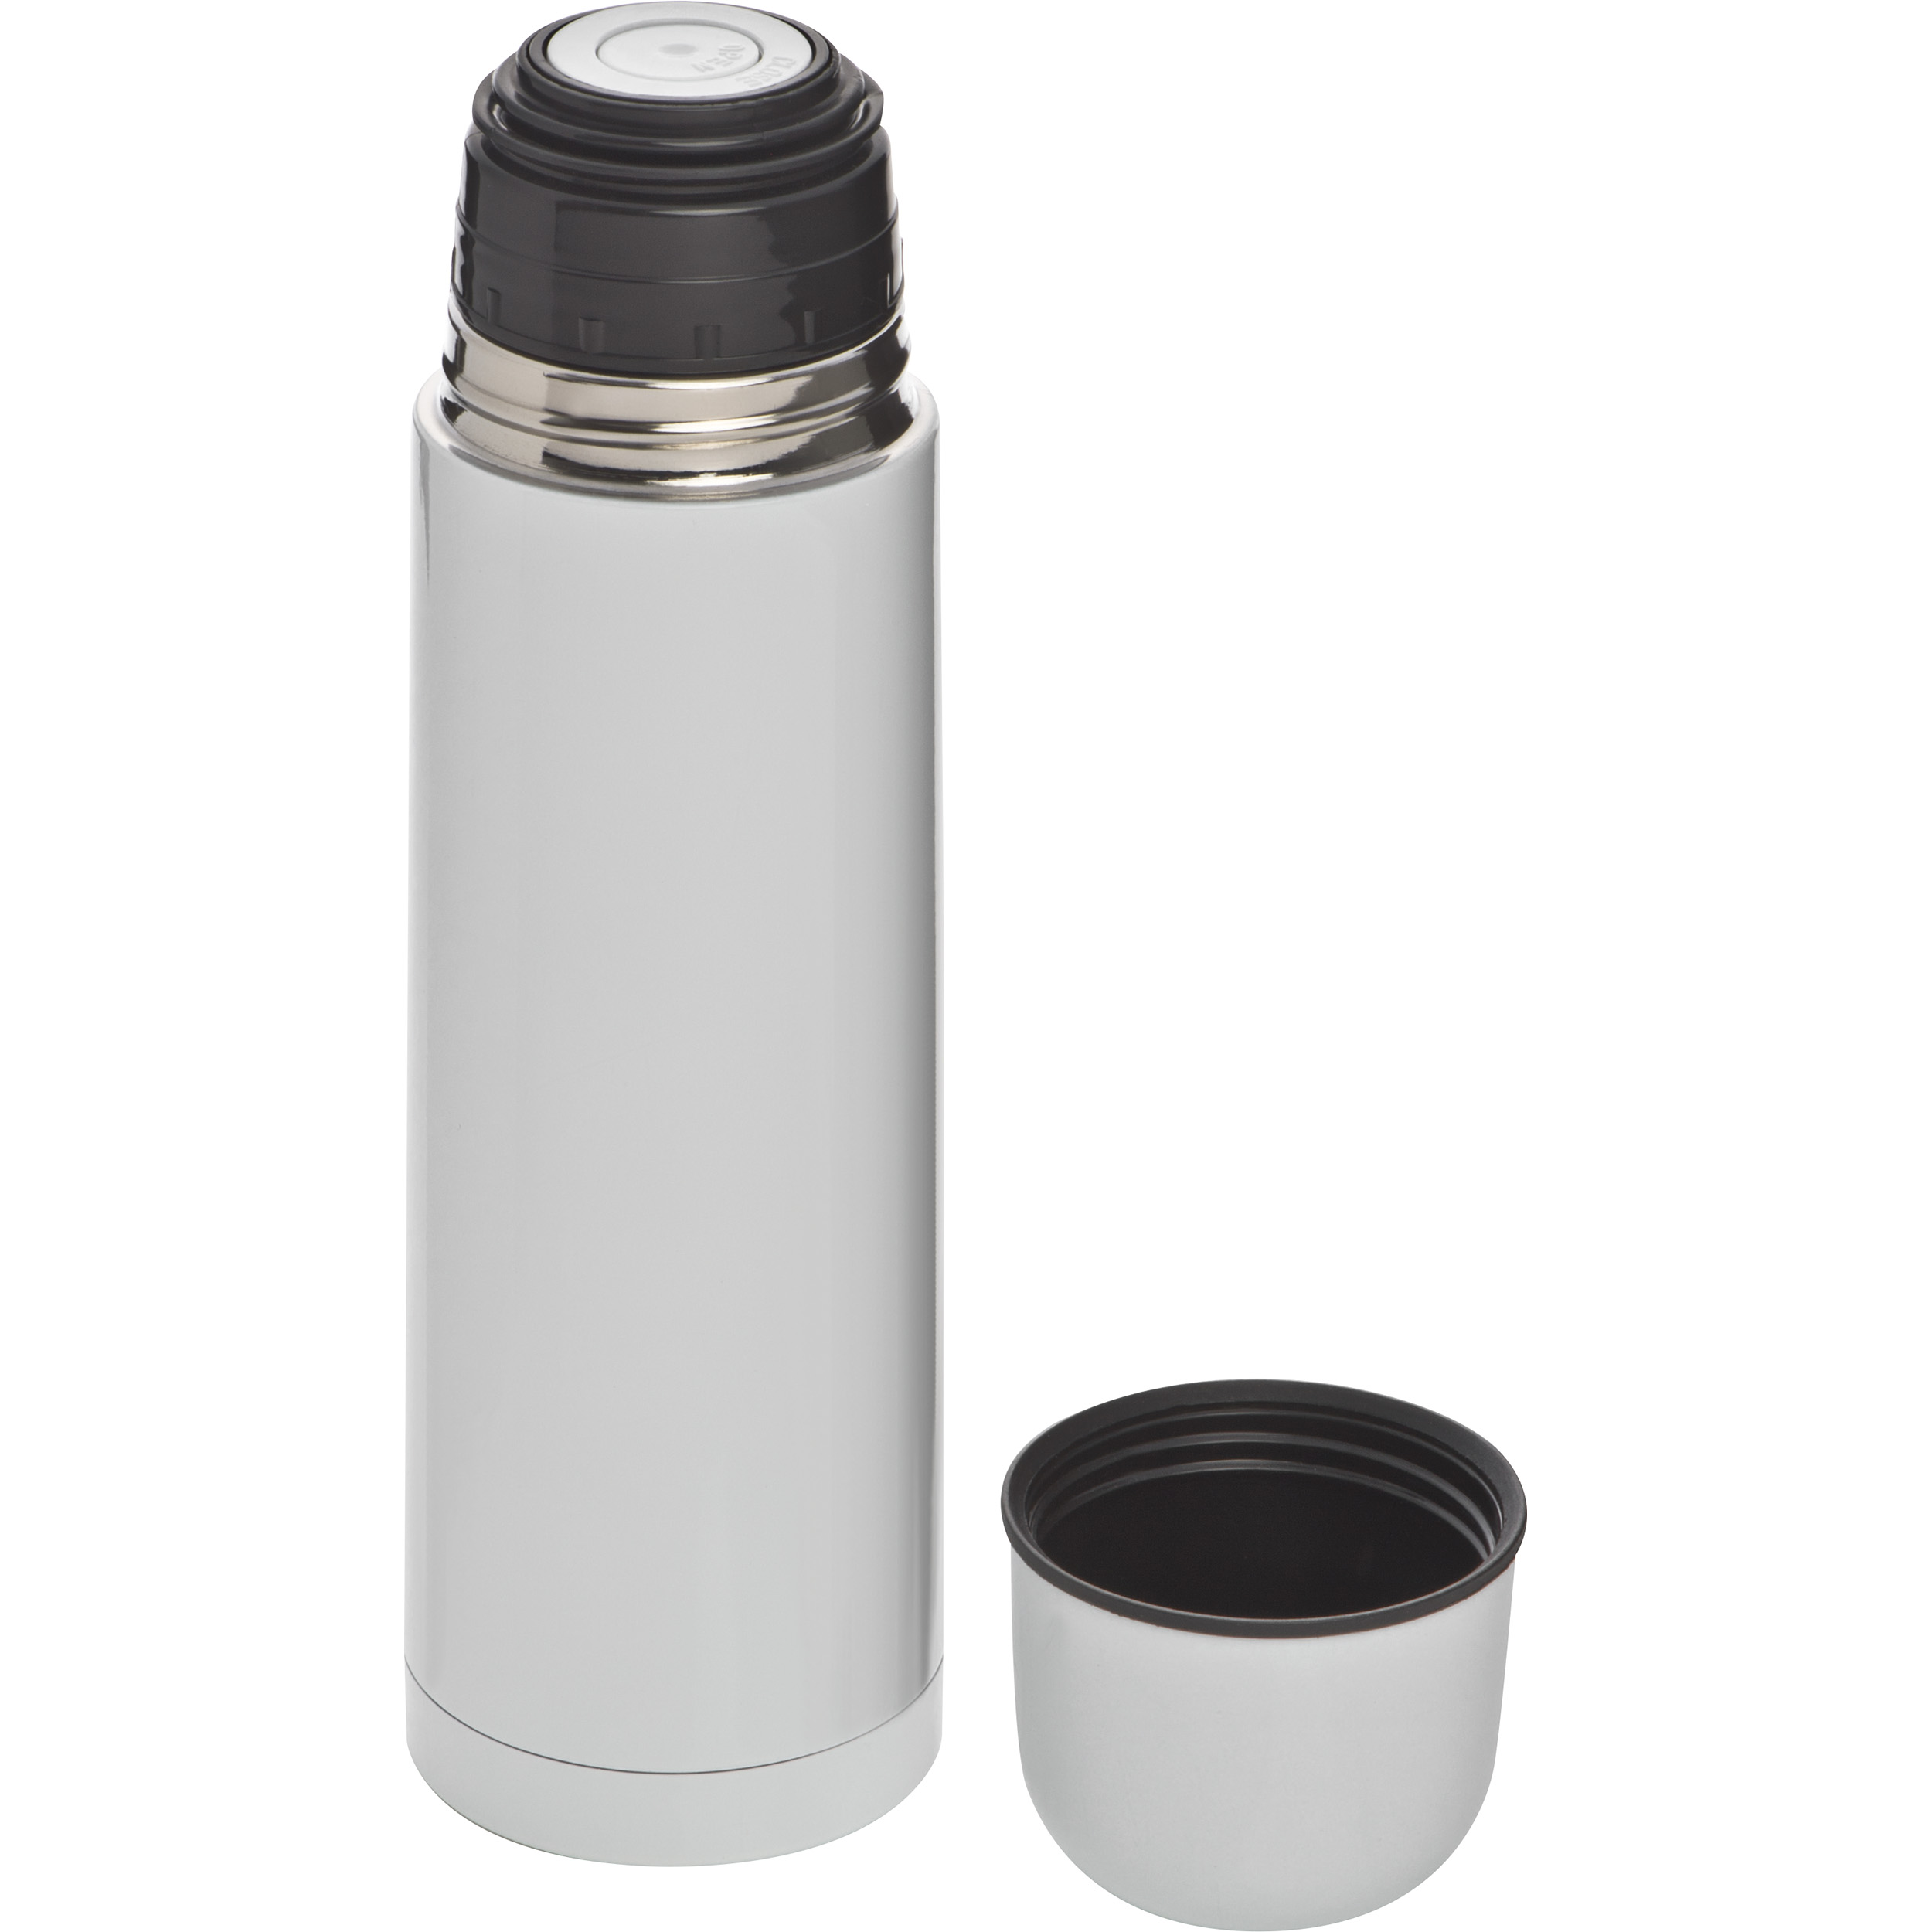 Stainless steel thermal flask